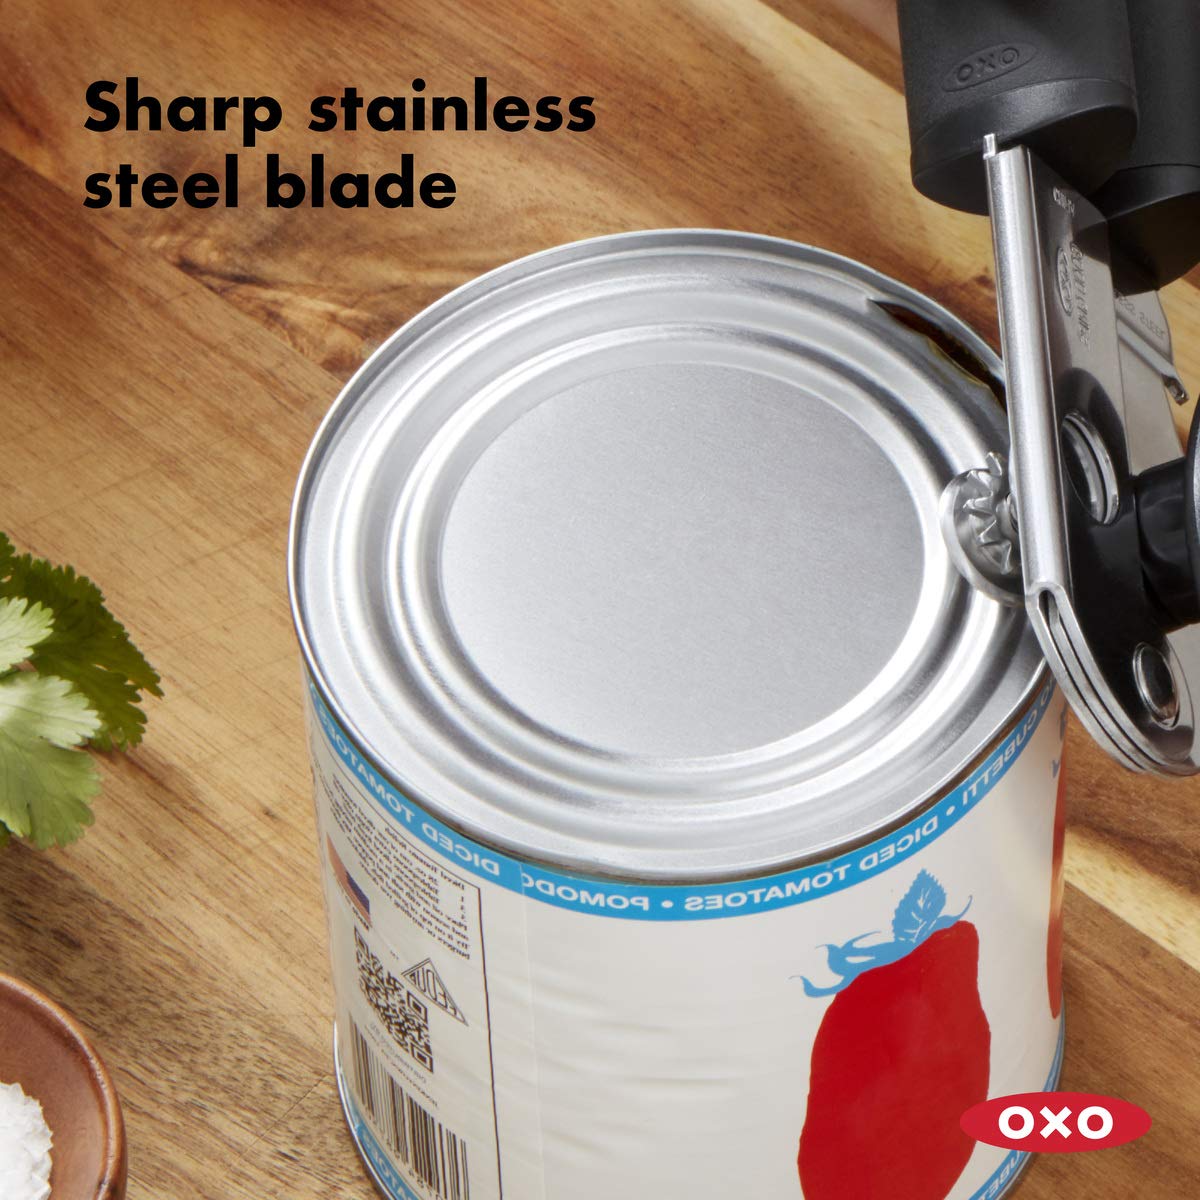 OXO Good Grips Plastic Carving & Cutting Board and OXO Good Grips Soft-Handled Manual Can Opener